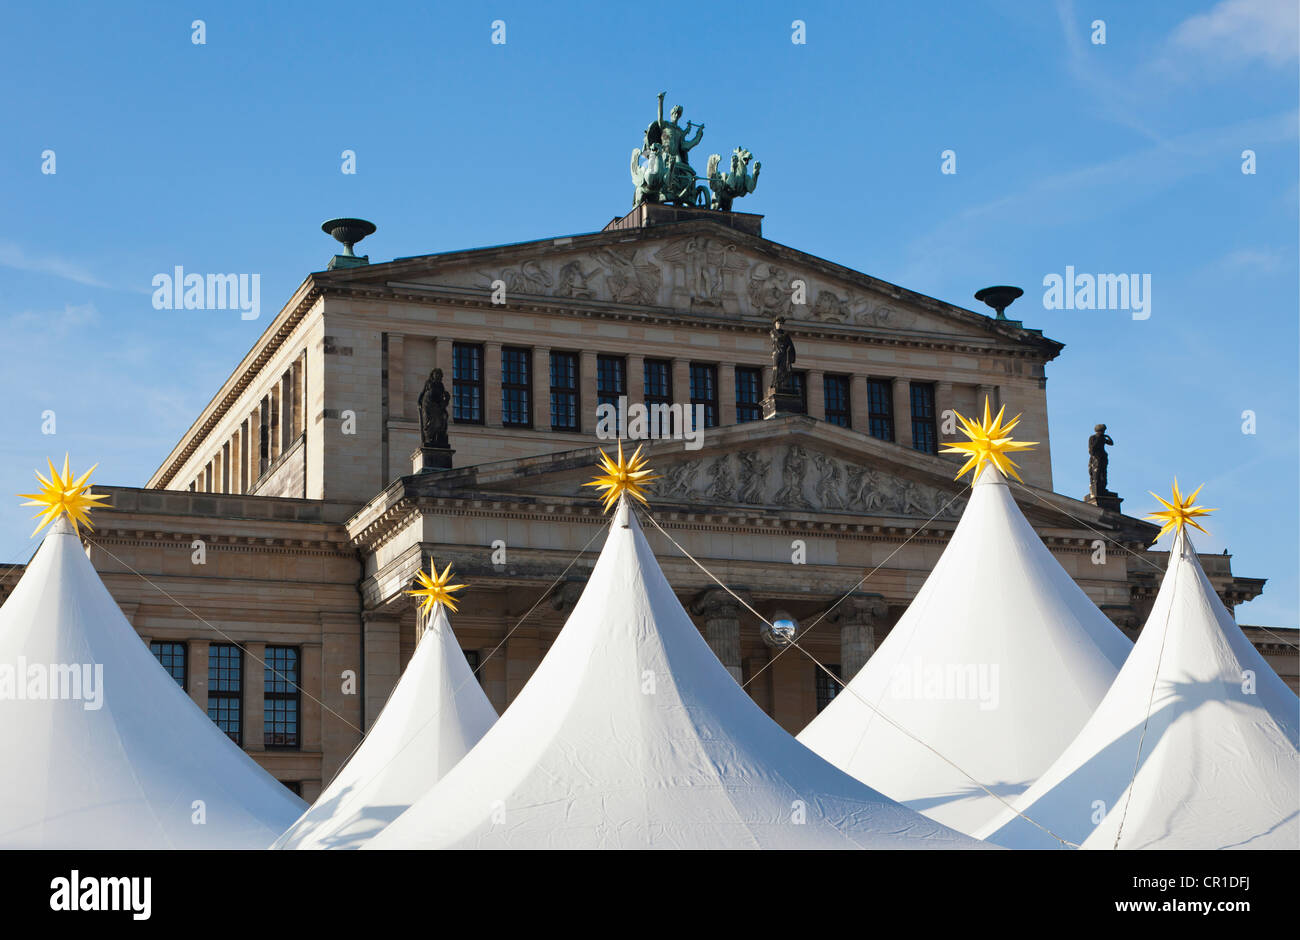 Tops of the tents of the  Christmas Market in front of the Konzerthaus  concert hall on Gendarmenmarkt square, Stock Photo